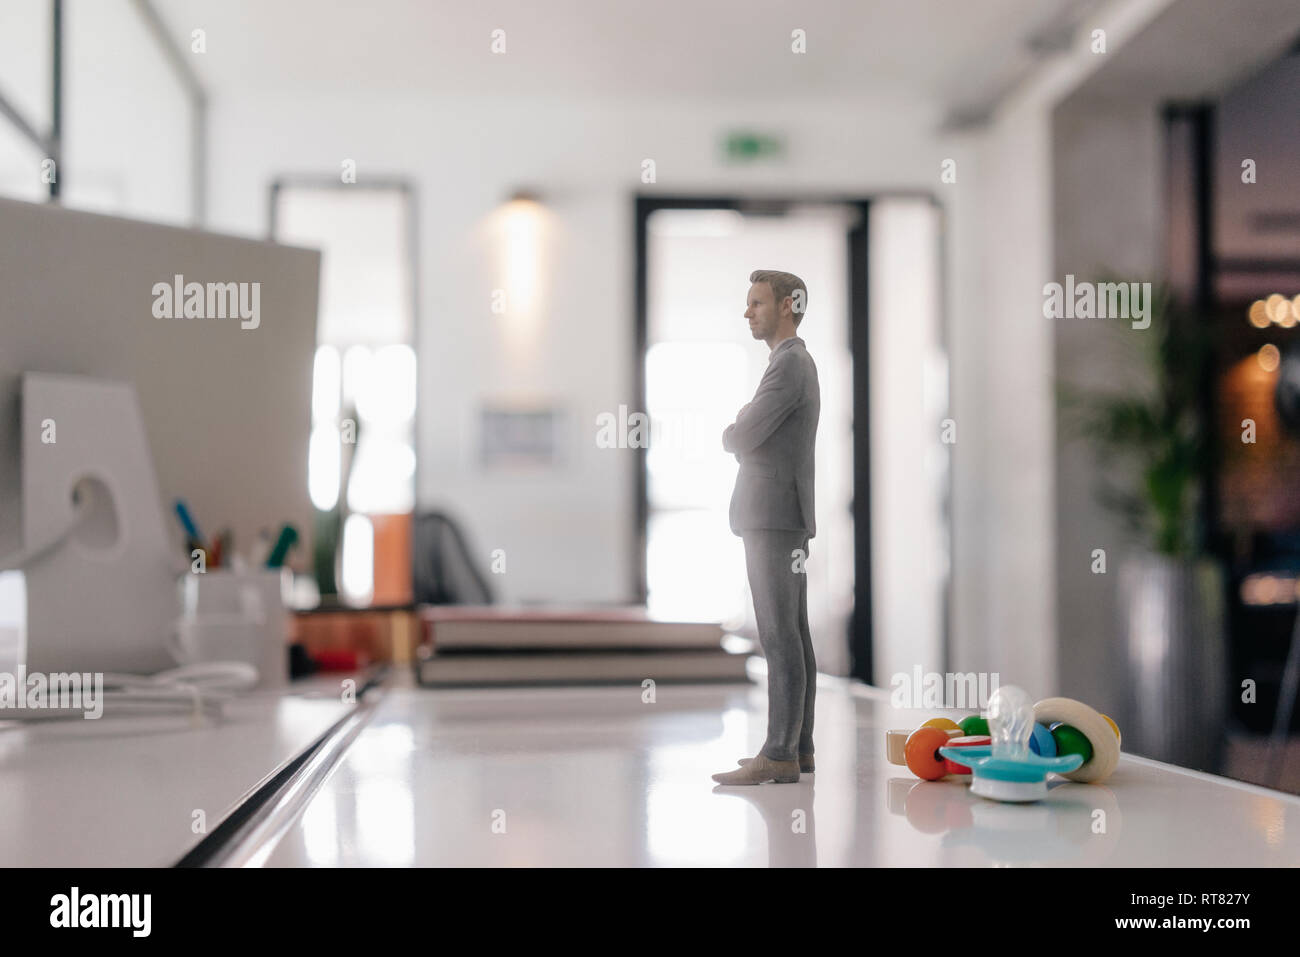 Businessman figurine standing on desk with pacifier and toys Stock Photo